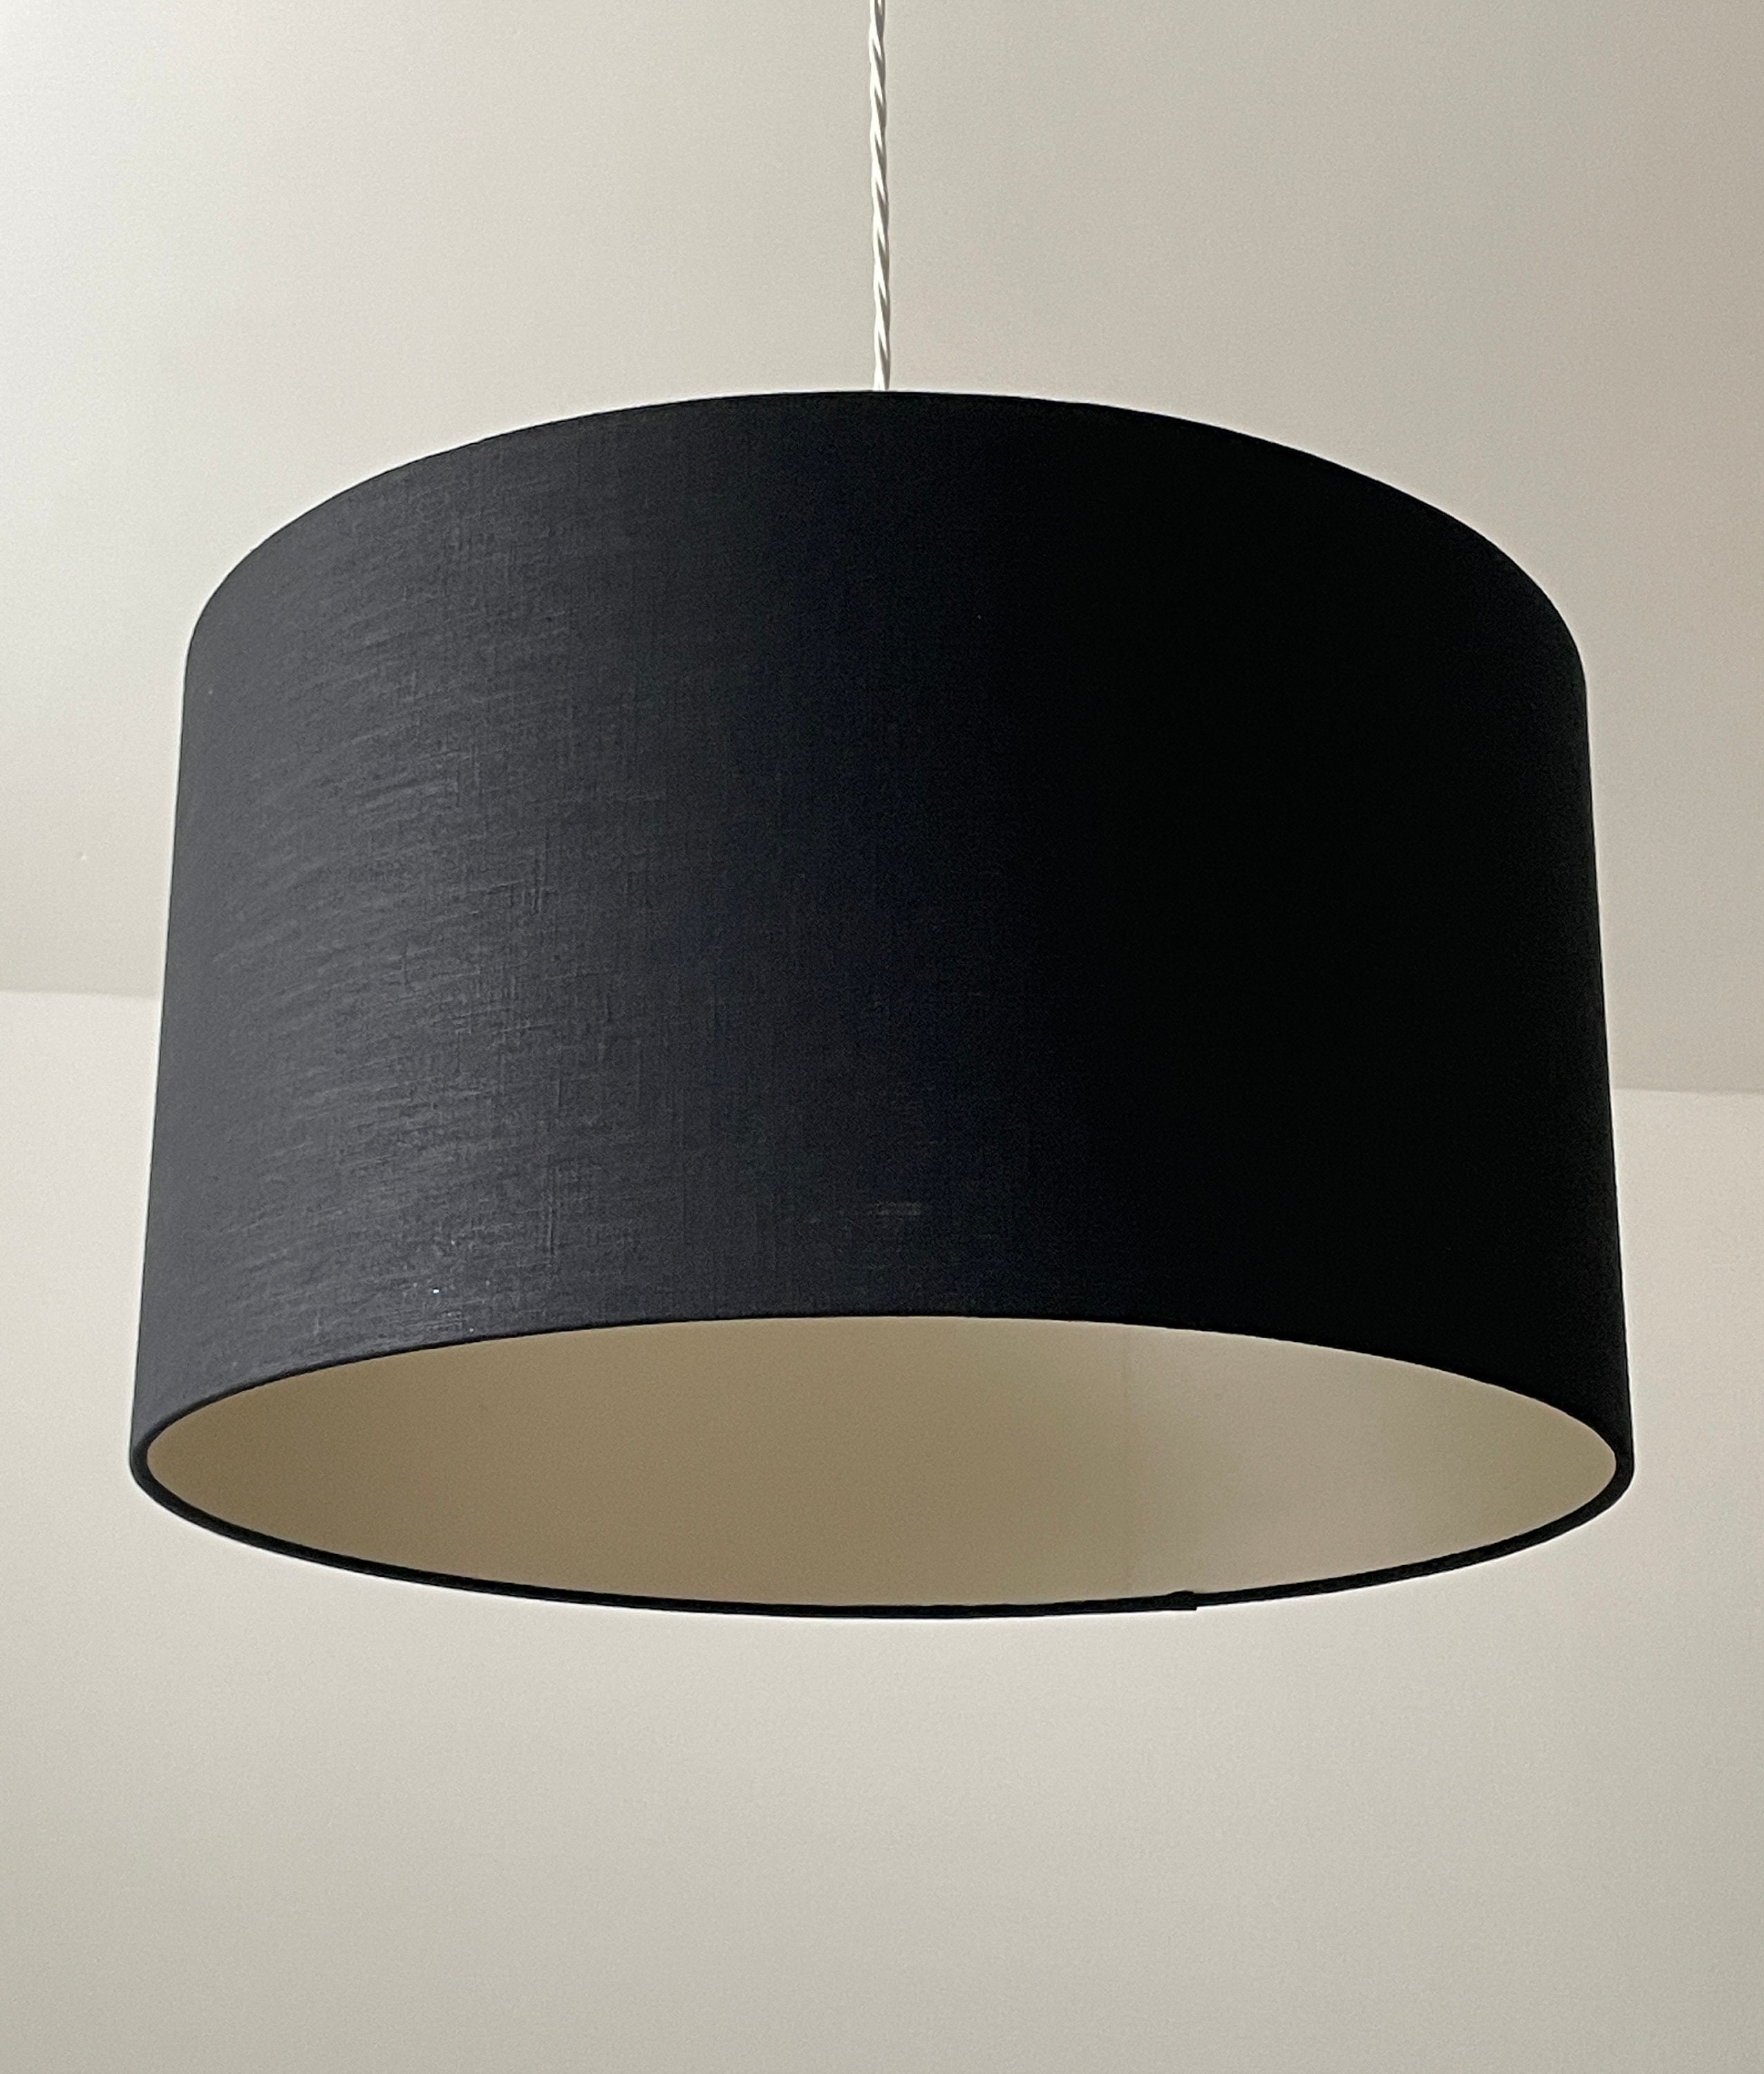 Details about   Lampshade Jet Black Textured 100% Linen Drum Light Shade 